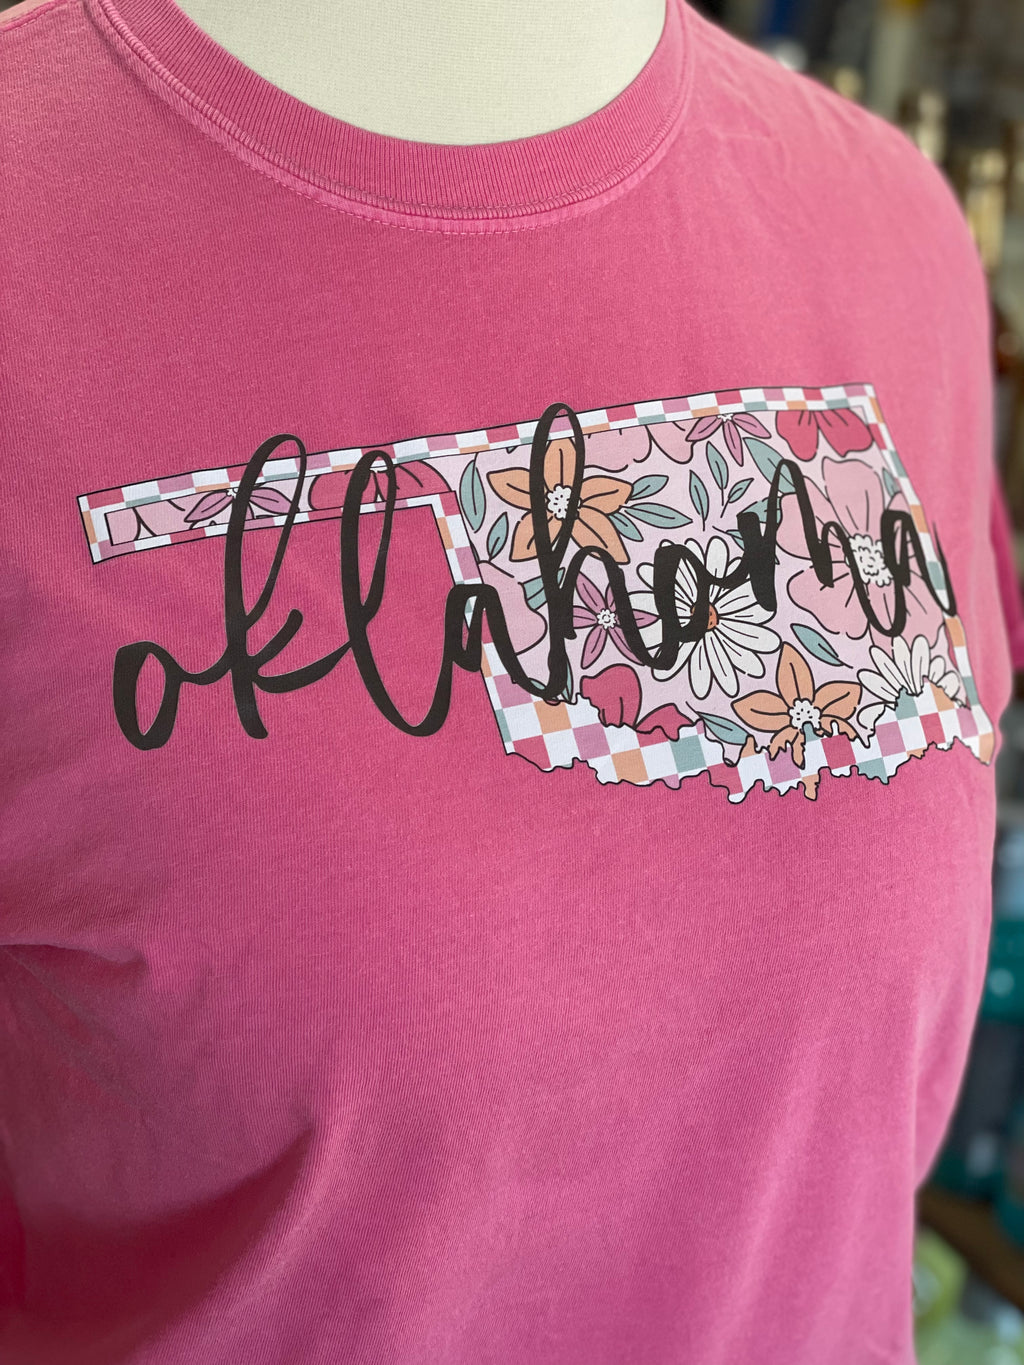 Oklahoma Crew Neck Floral Tee - Crunchberry